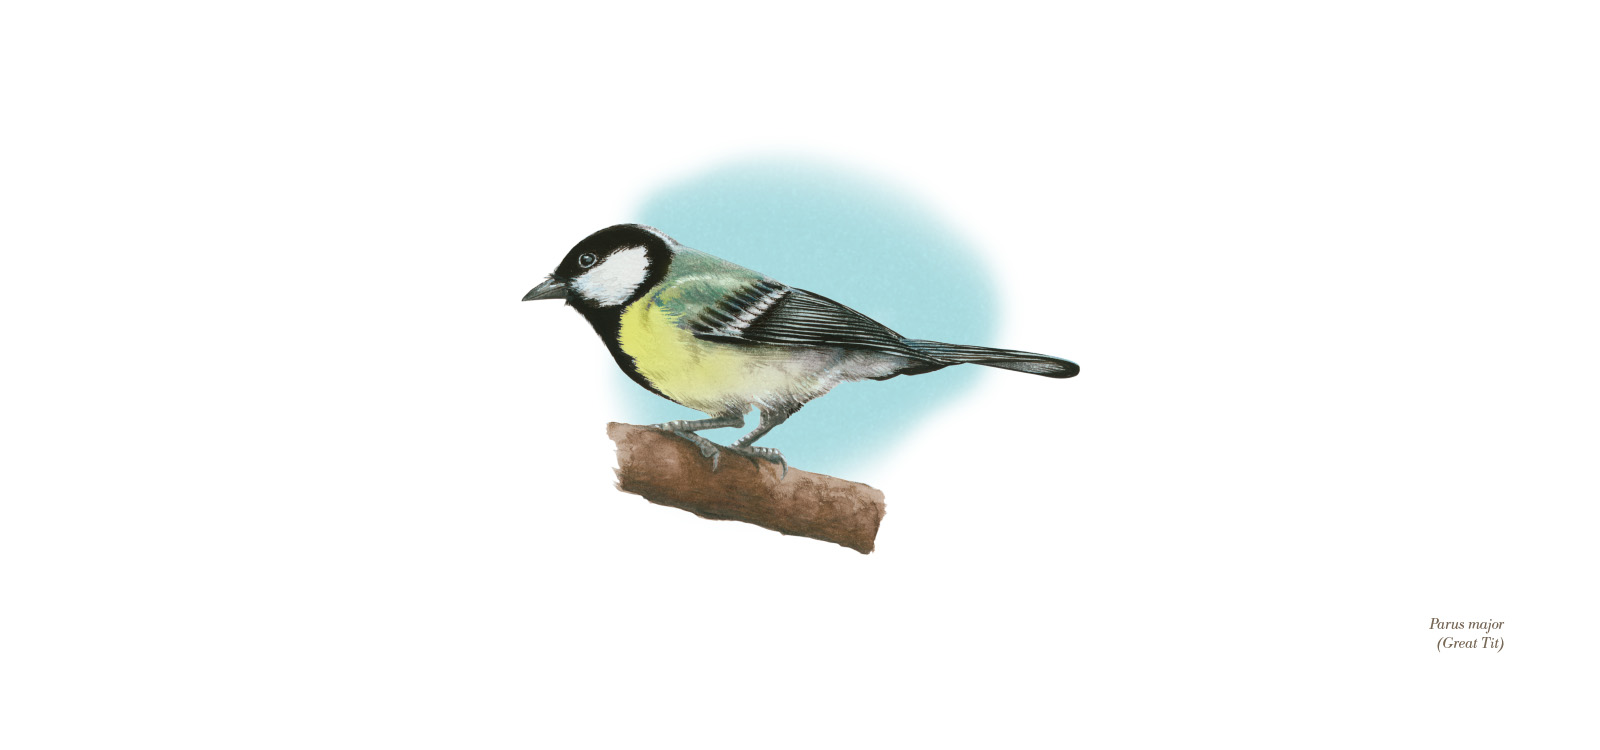 Great Tit by Lionel Portier